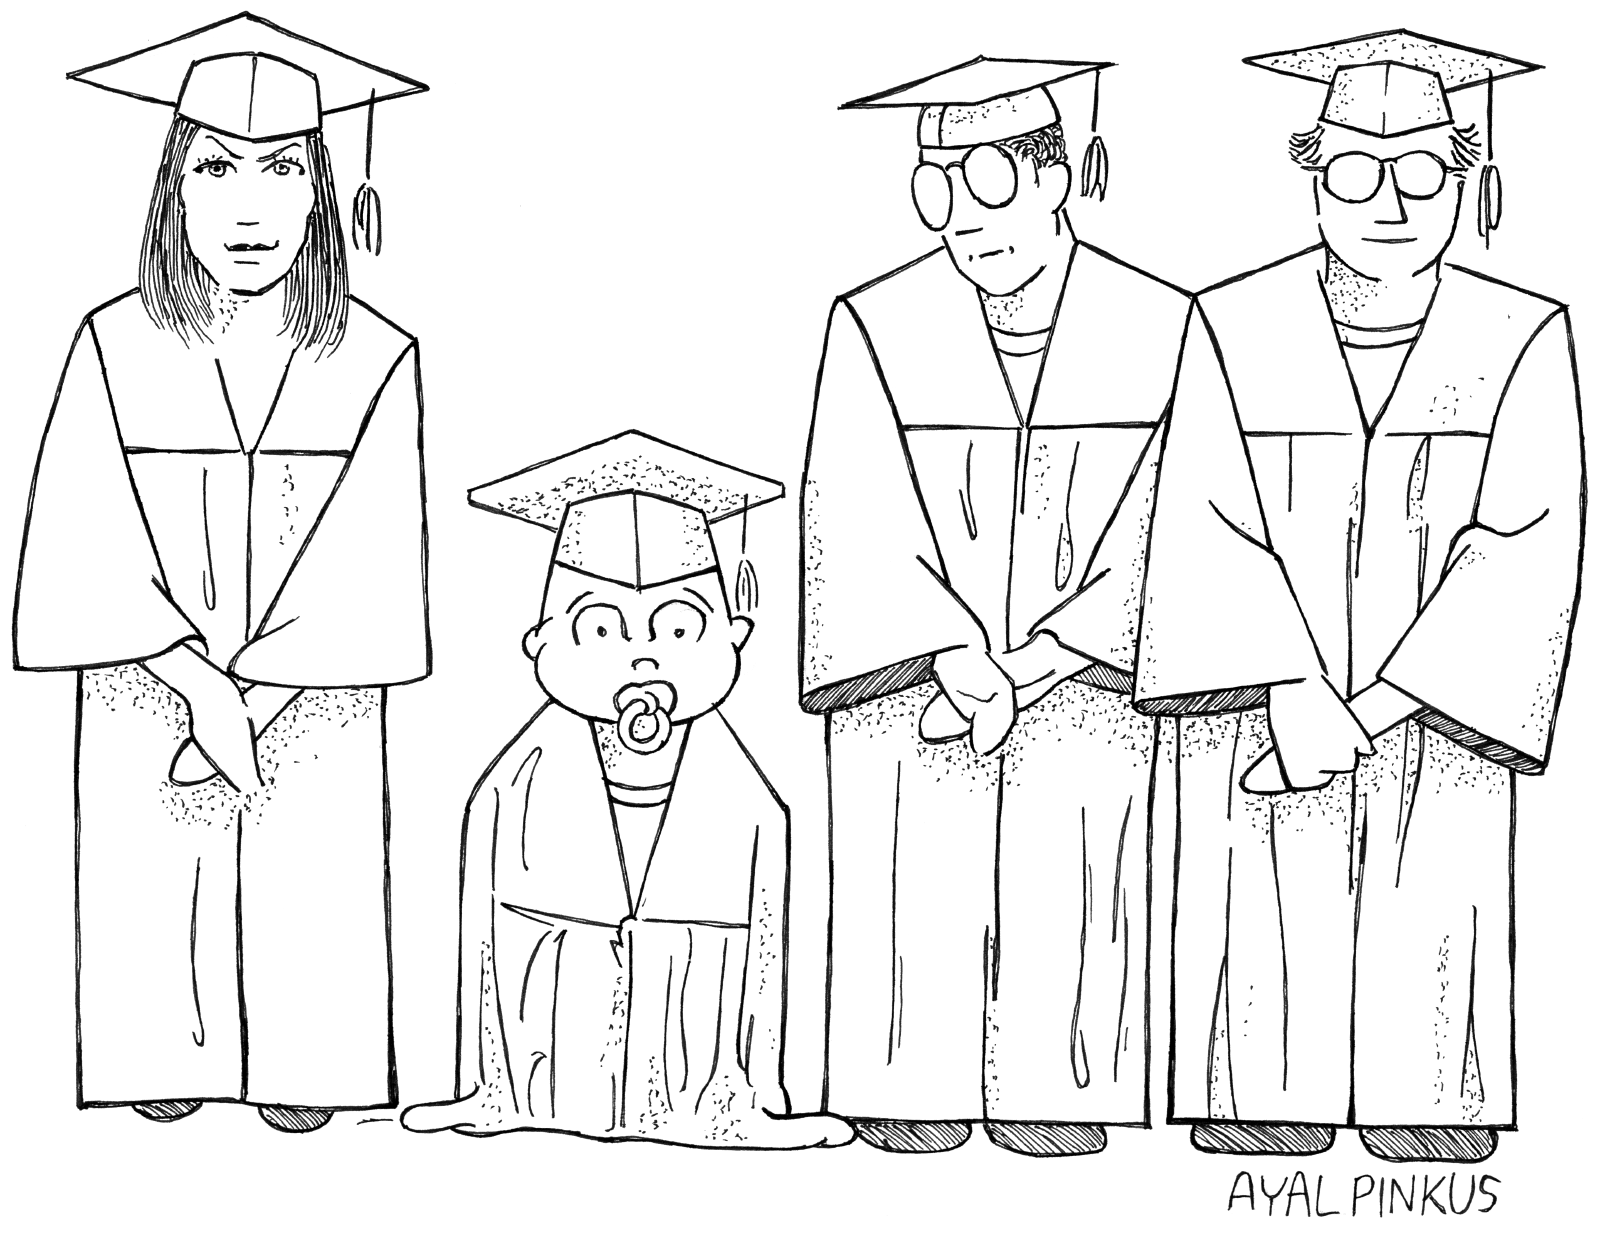 A cartoon about kids too young to be in university